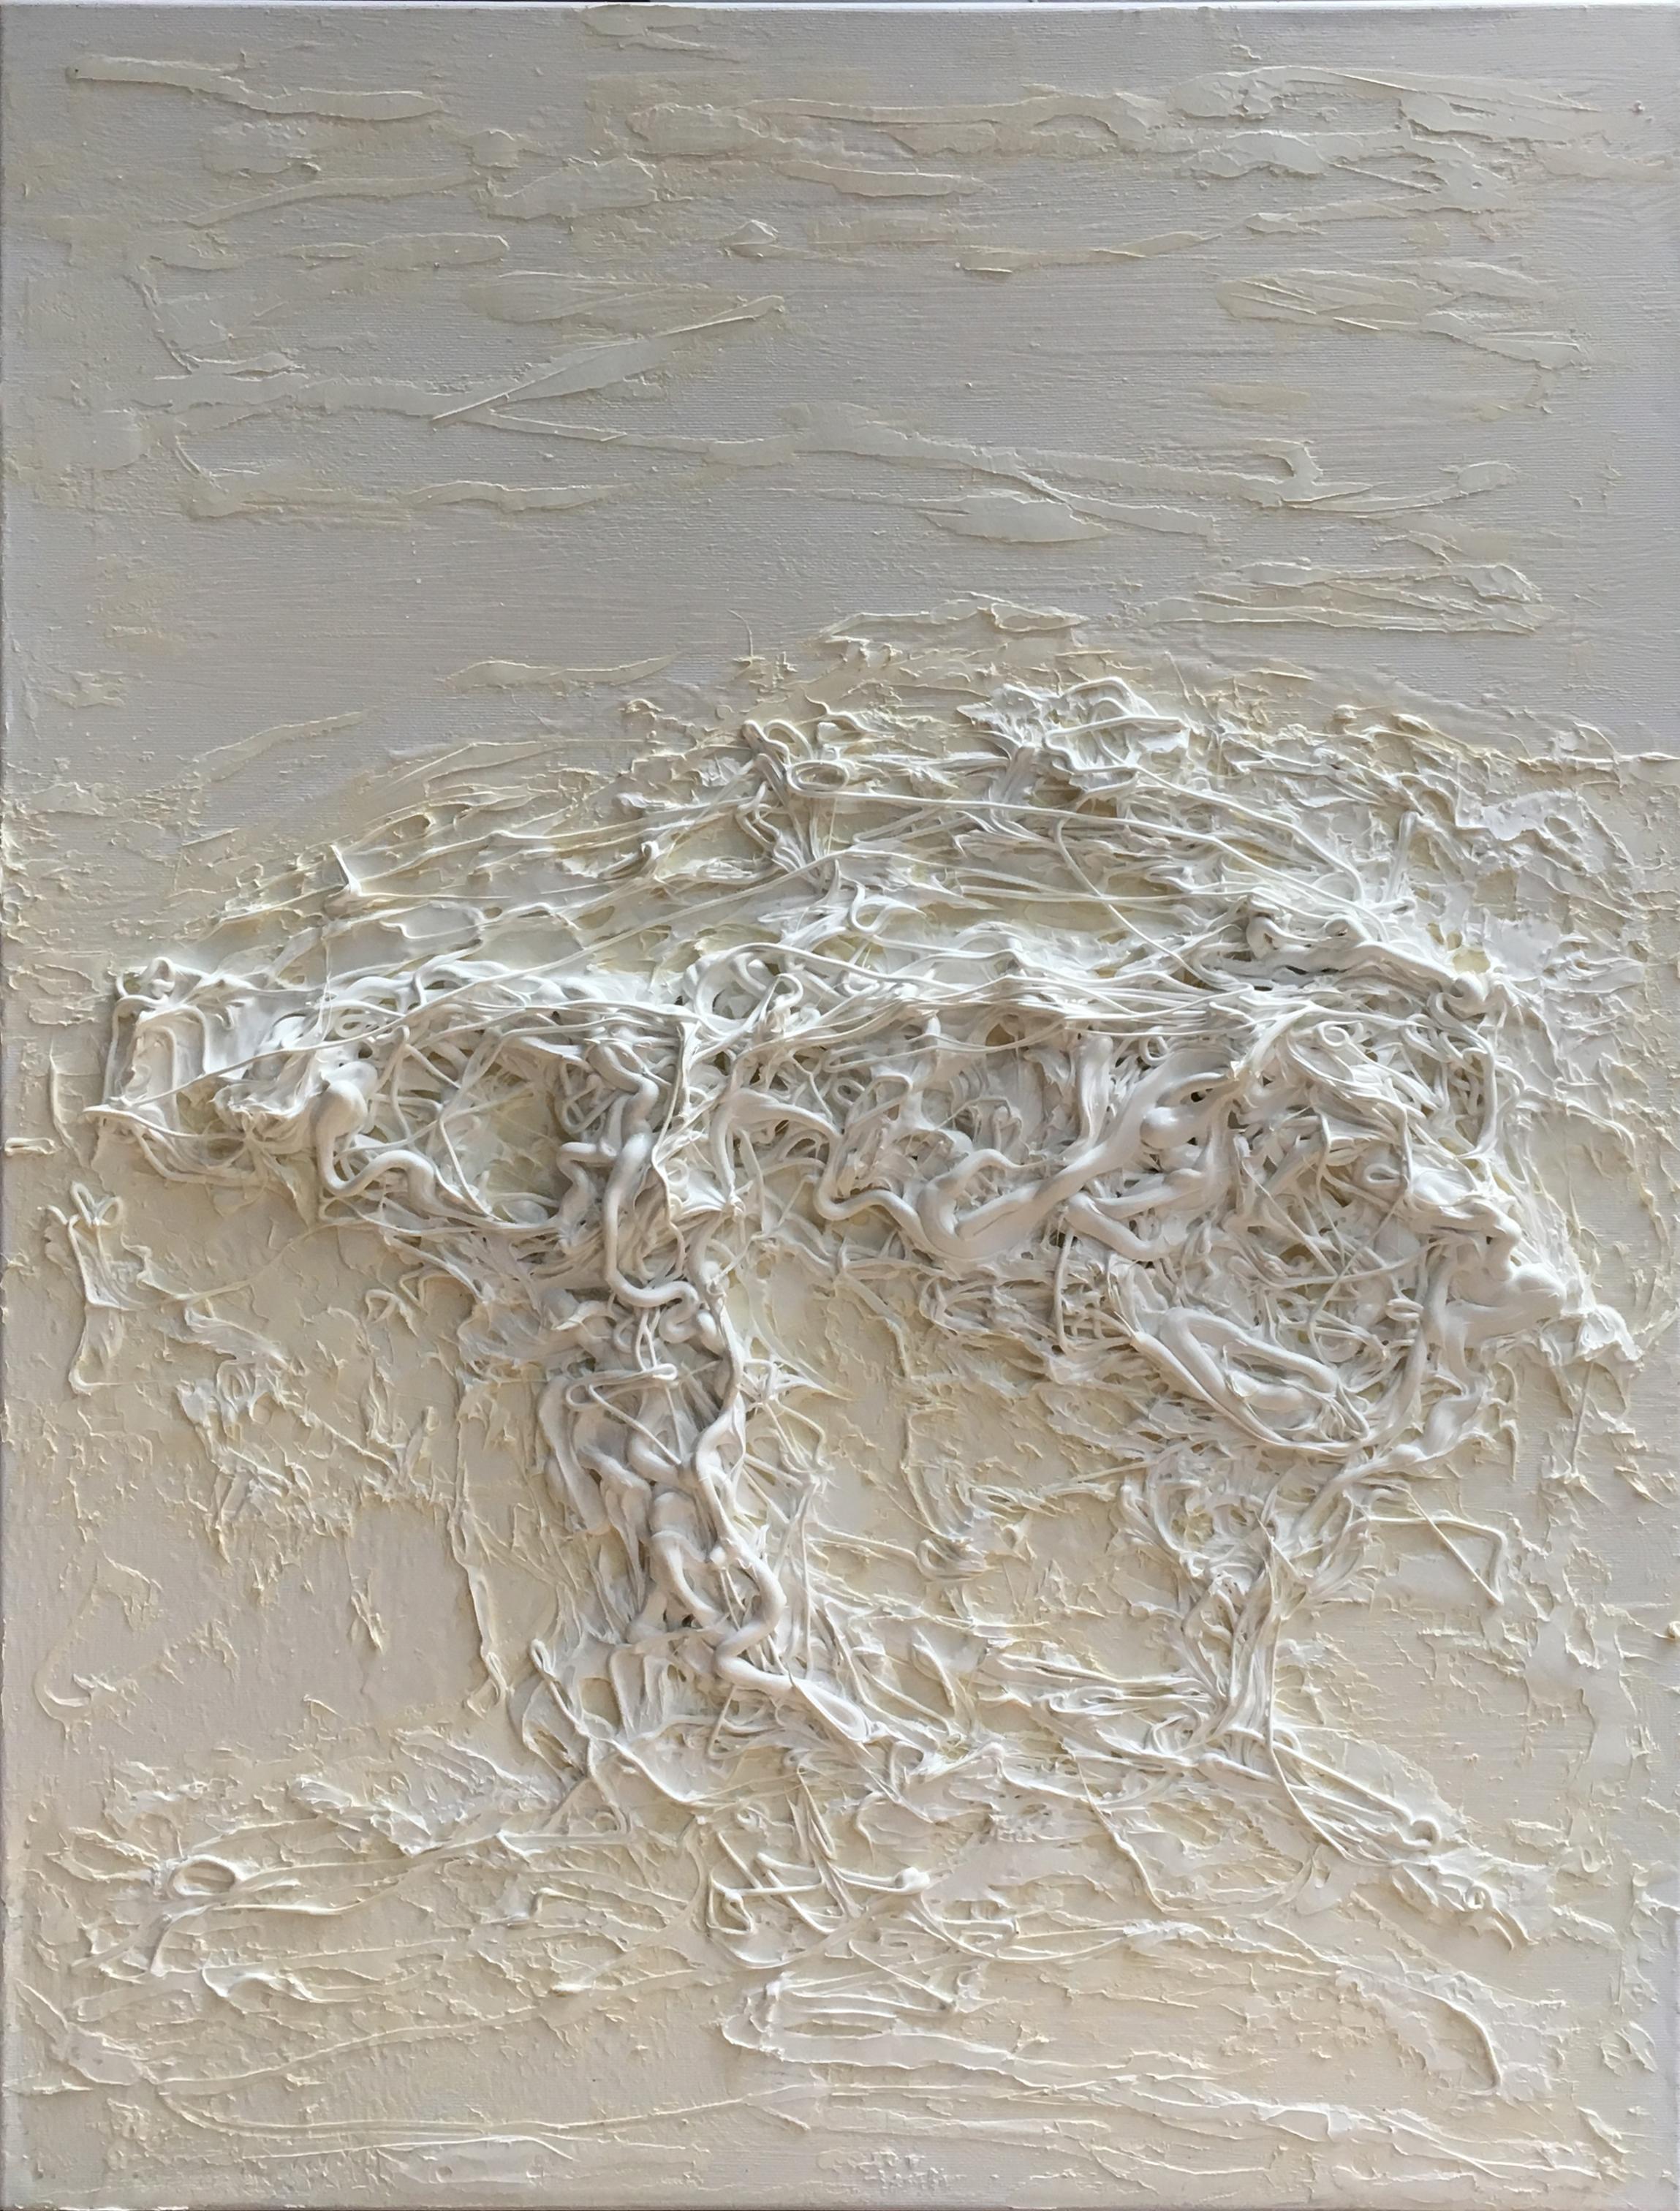 Untitled 05, 2017
White adhesive and white oil painting on canvas
(Signed on reverse)
31.49 H x 23.62 W in
80 H x 60 W cm

Zsolt Berszán treats the first layer of the drawing as a substrate, as a surface on which something is deposited or inscribed.